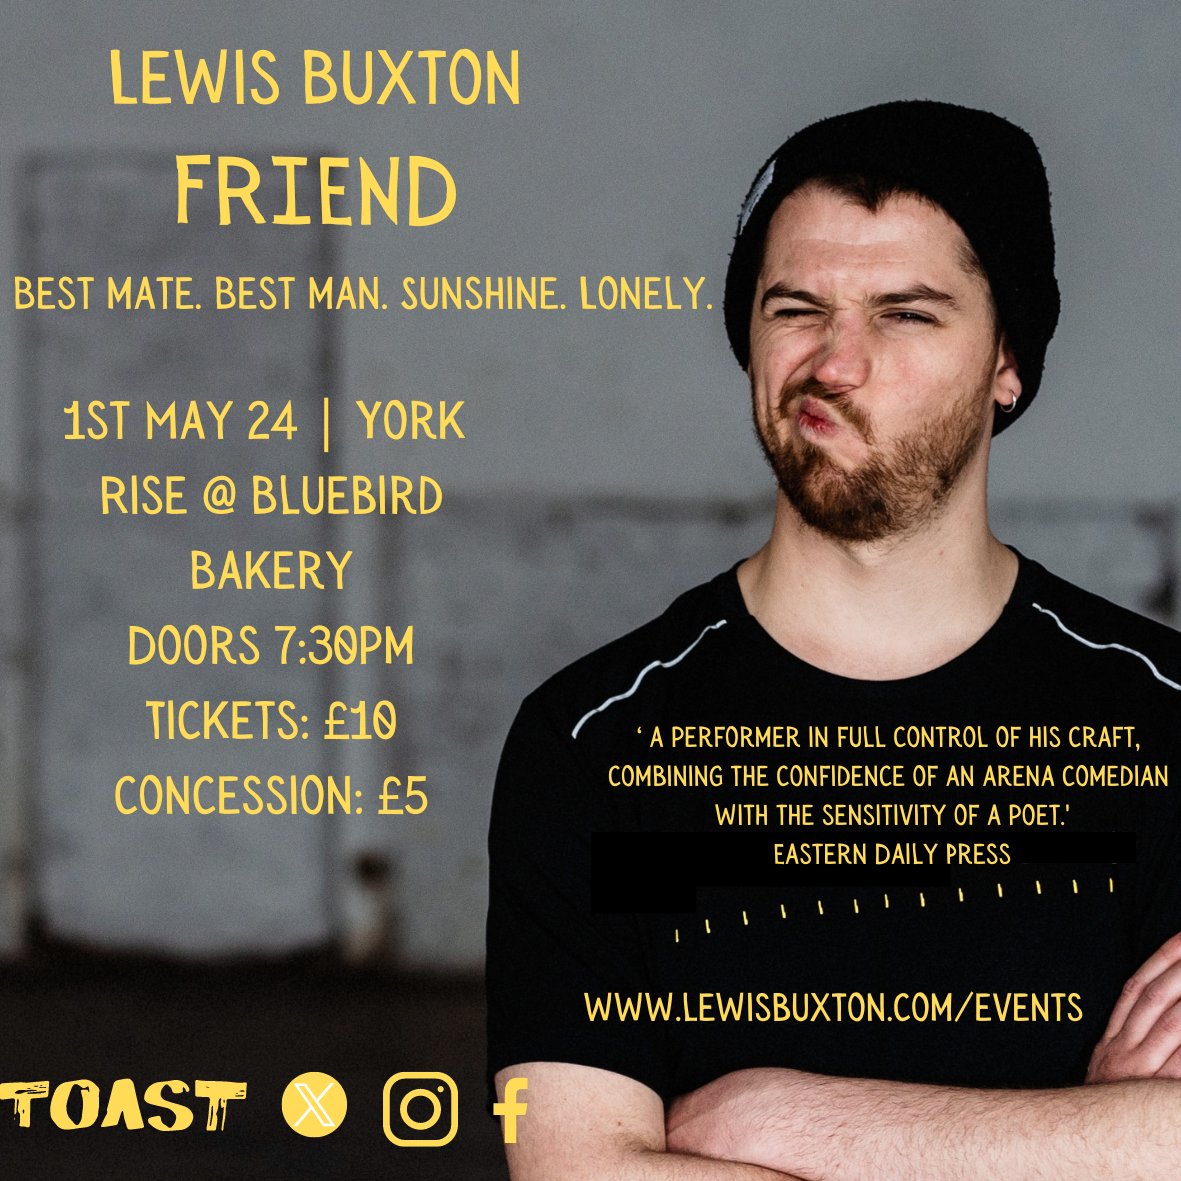 Our lovely director @LewisBuxton93 is coming YORK with his new show FRIEND. If you live nearby this is a great night out! Tickets: £10/£5 Doors: 7:30pm Date: 1st May 2024 eventbrite.com/e/lewis-buxton…